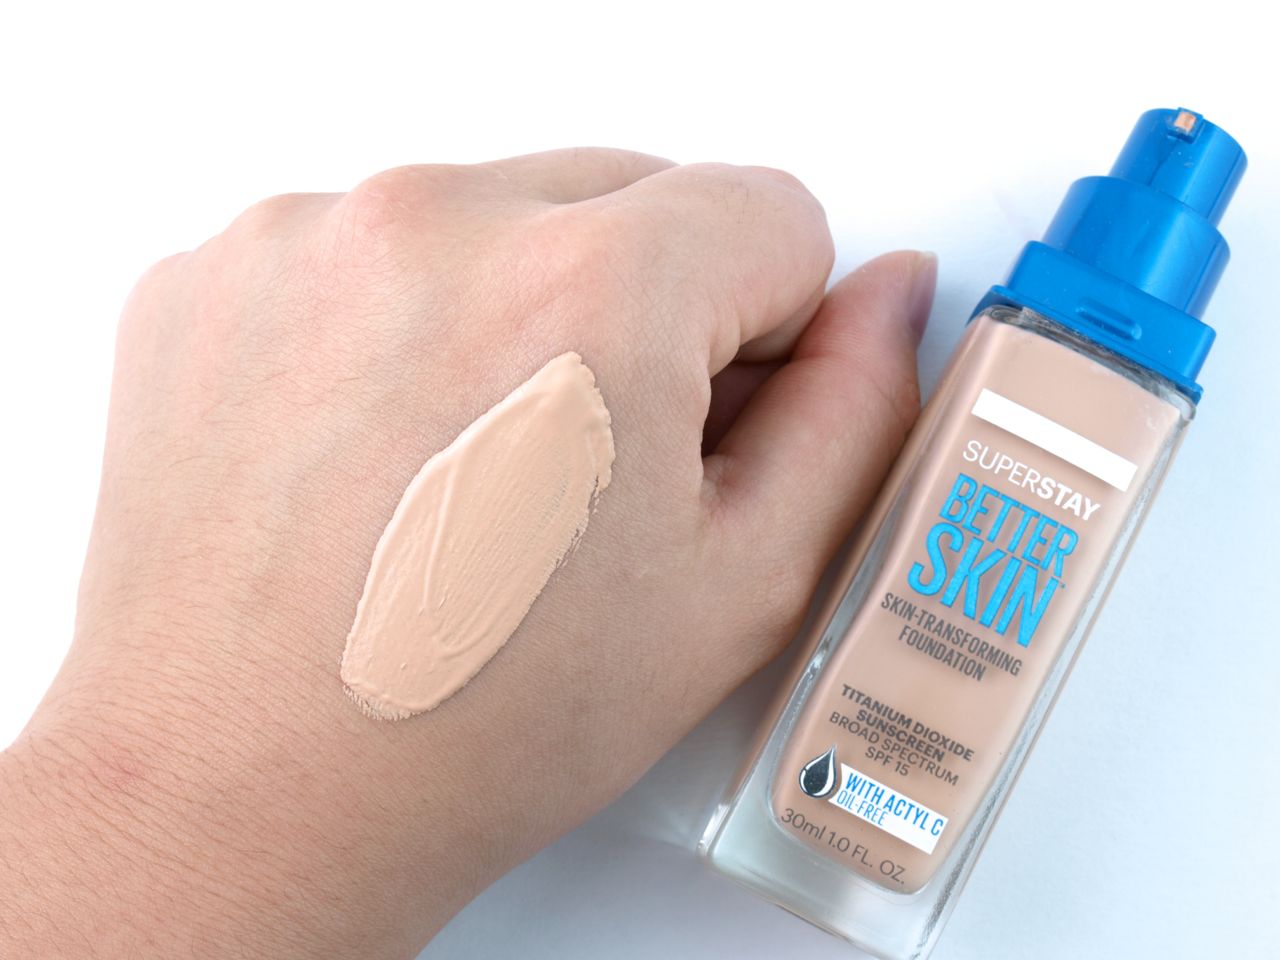 Maybelline SuperStay Better Skin Foundation in "15 Ivory": Review and Swatches